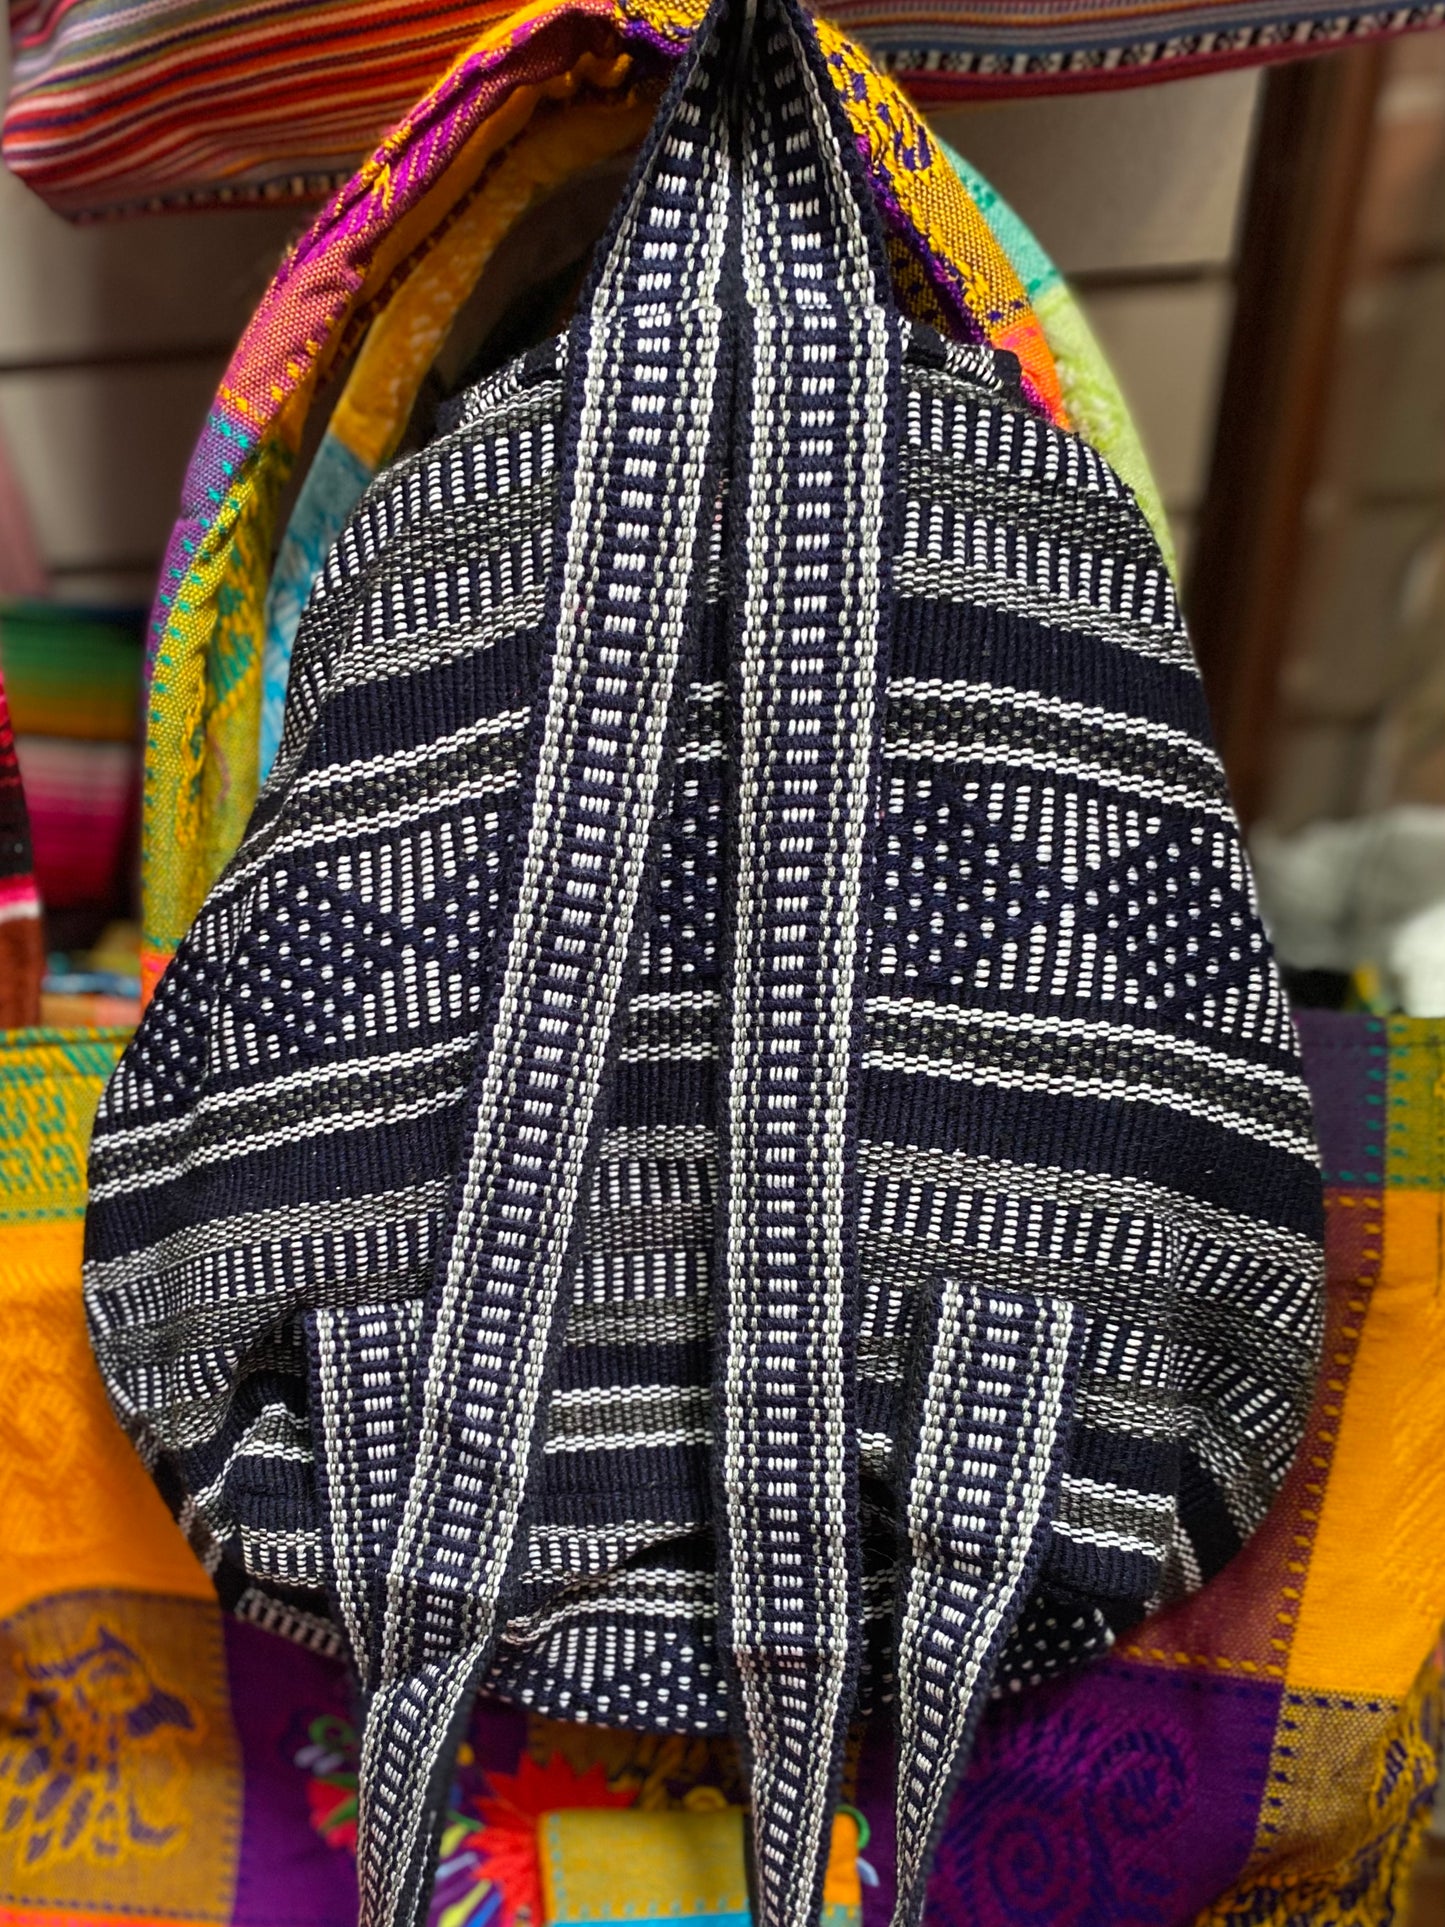 Navy, Gray and Black Mexican Medium Sized Handwoven Backpack